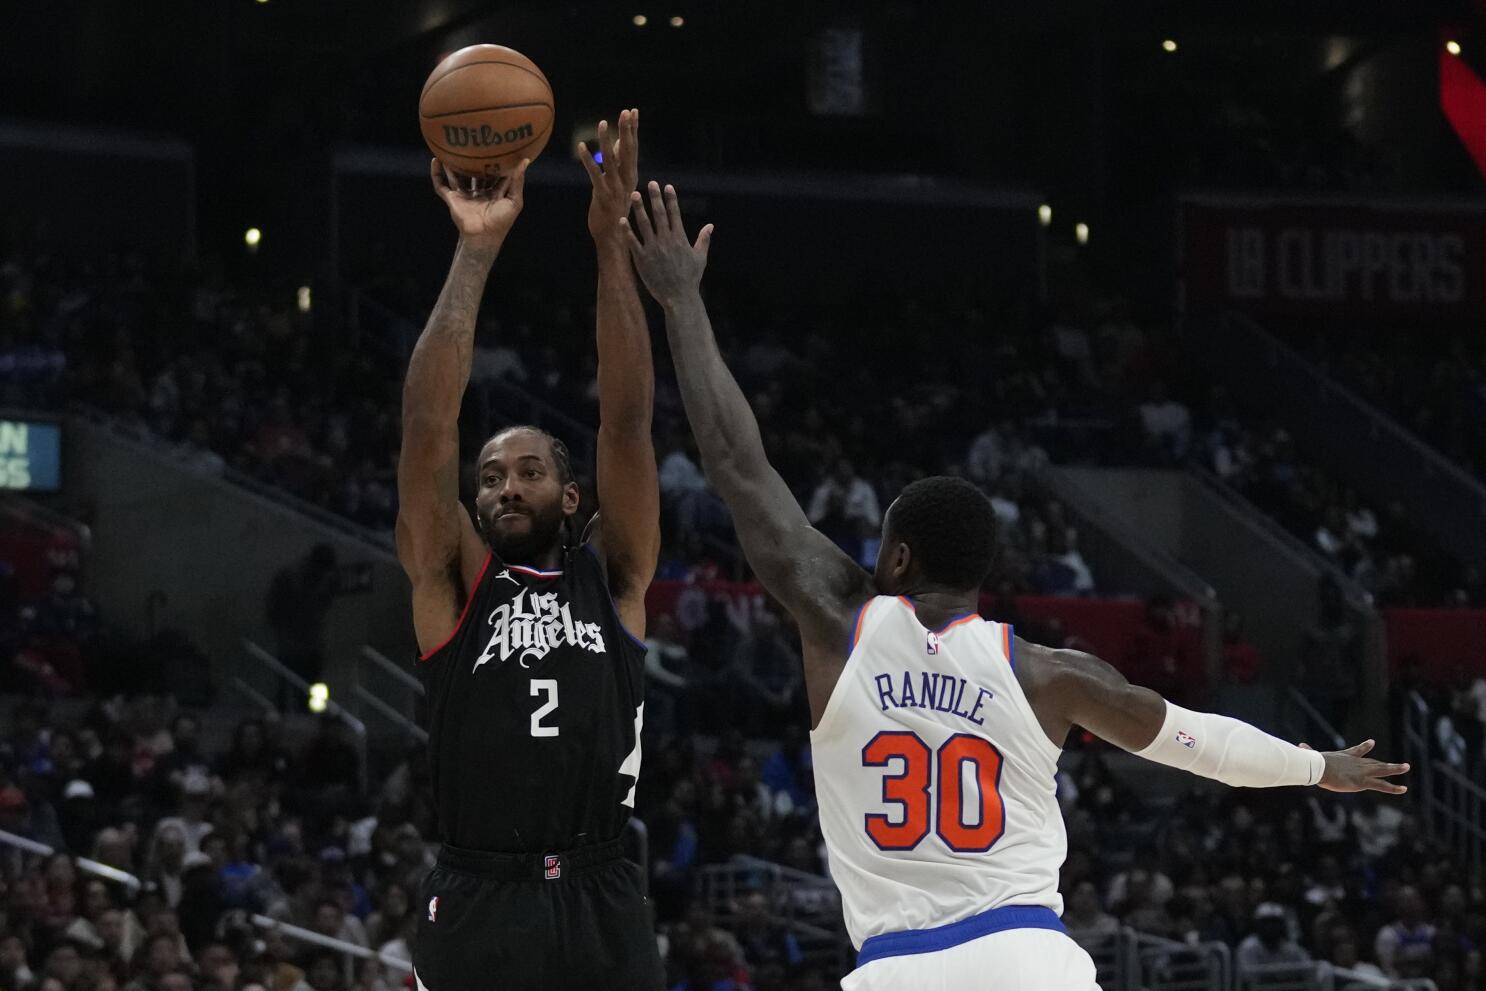 Knicks give up 144 points in tough loss to Clippers